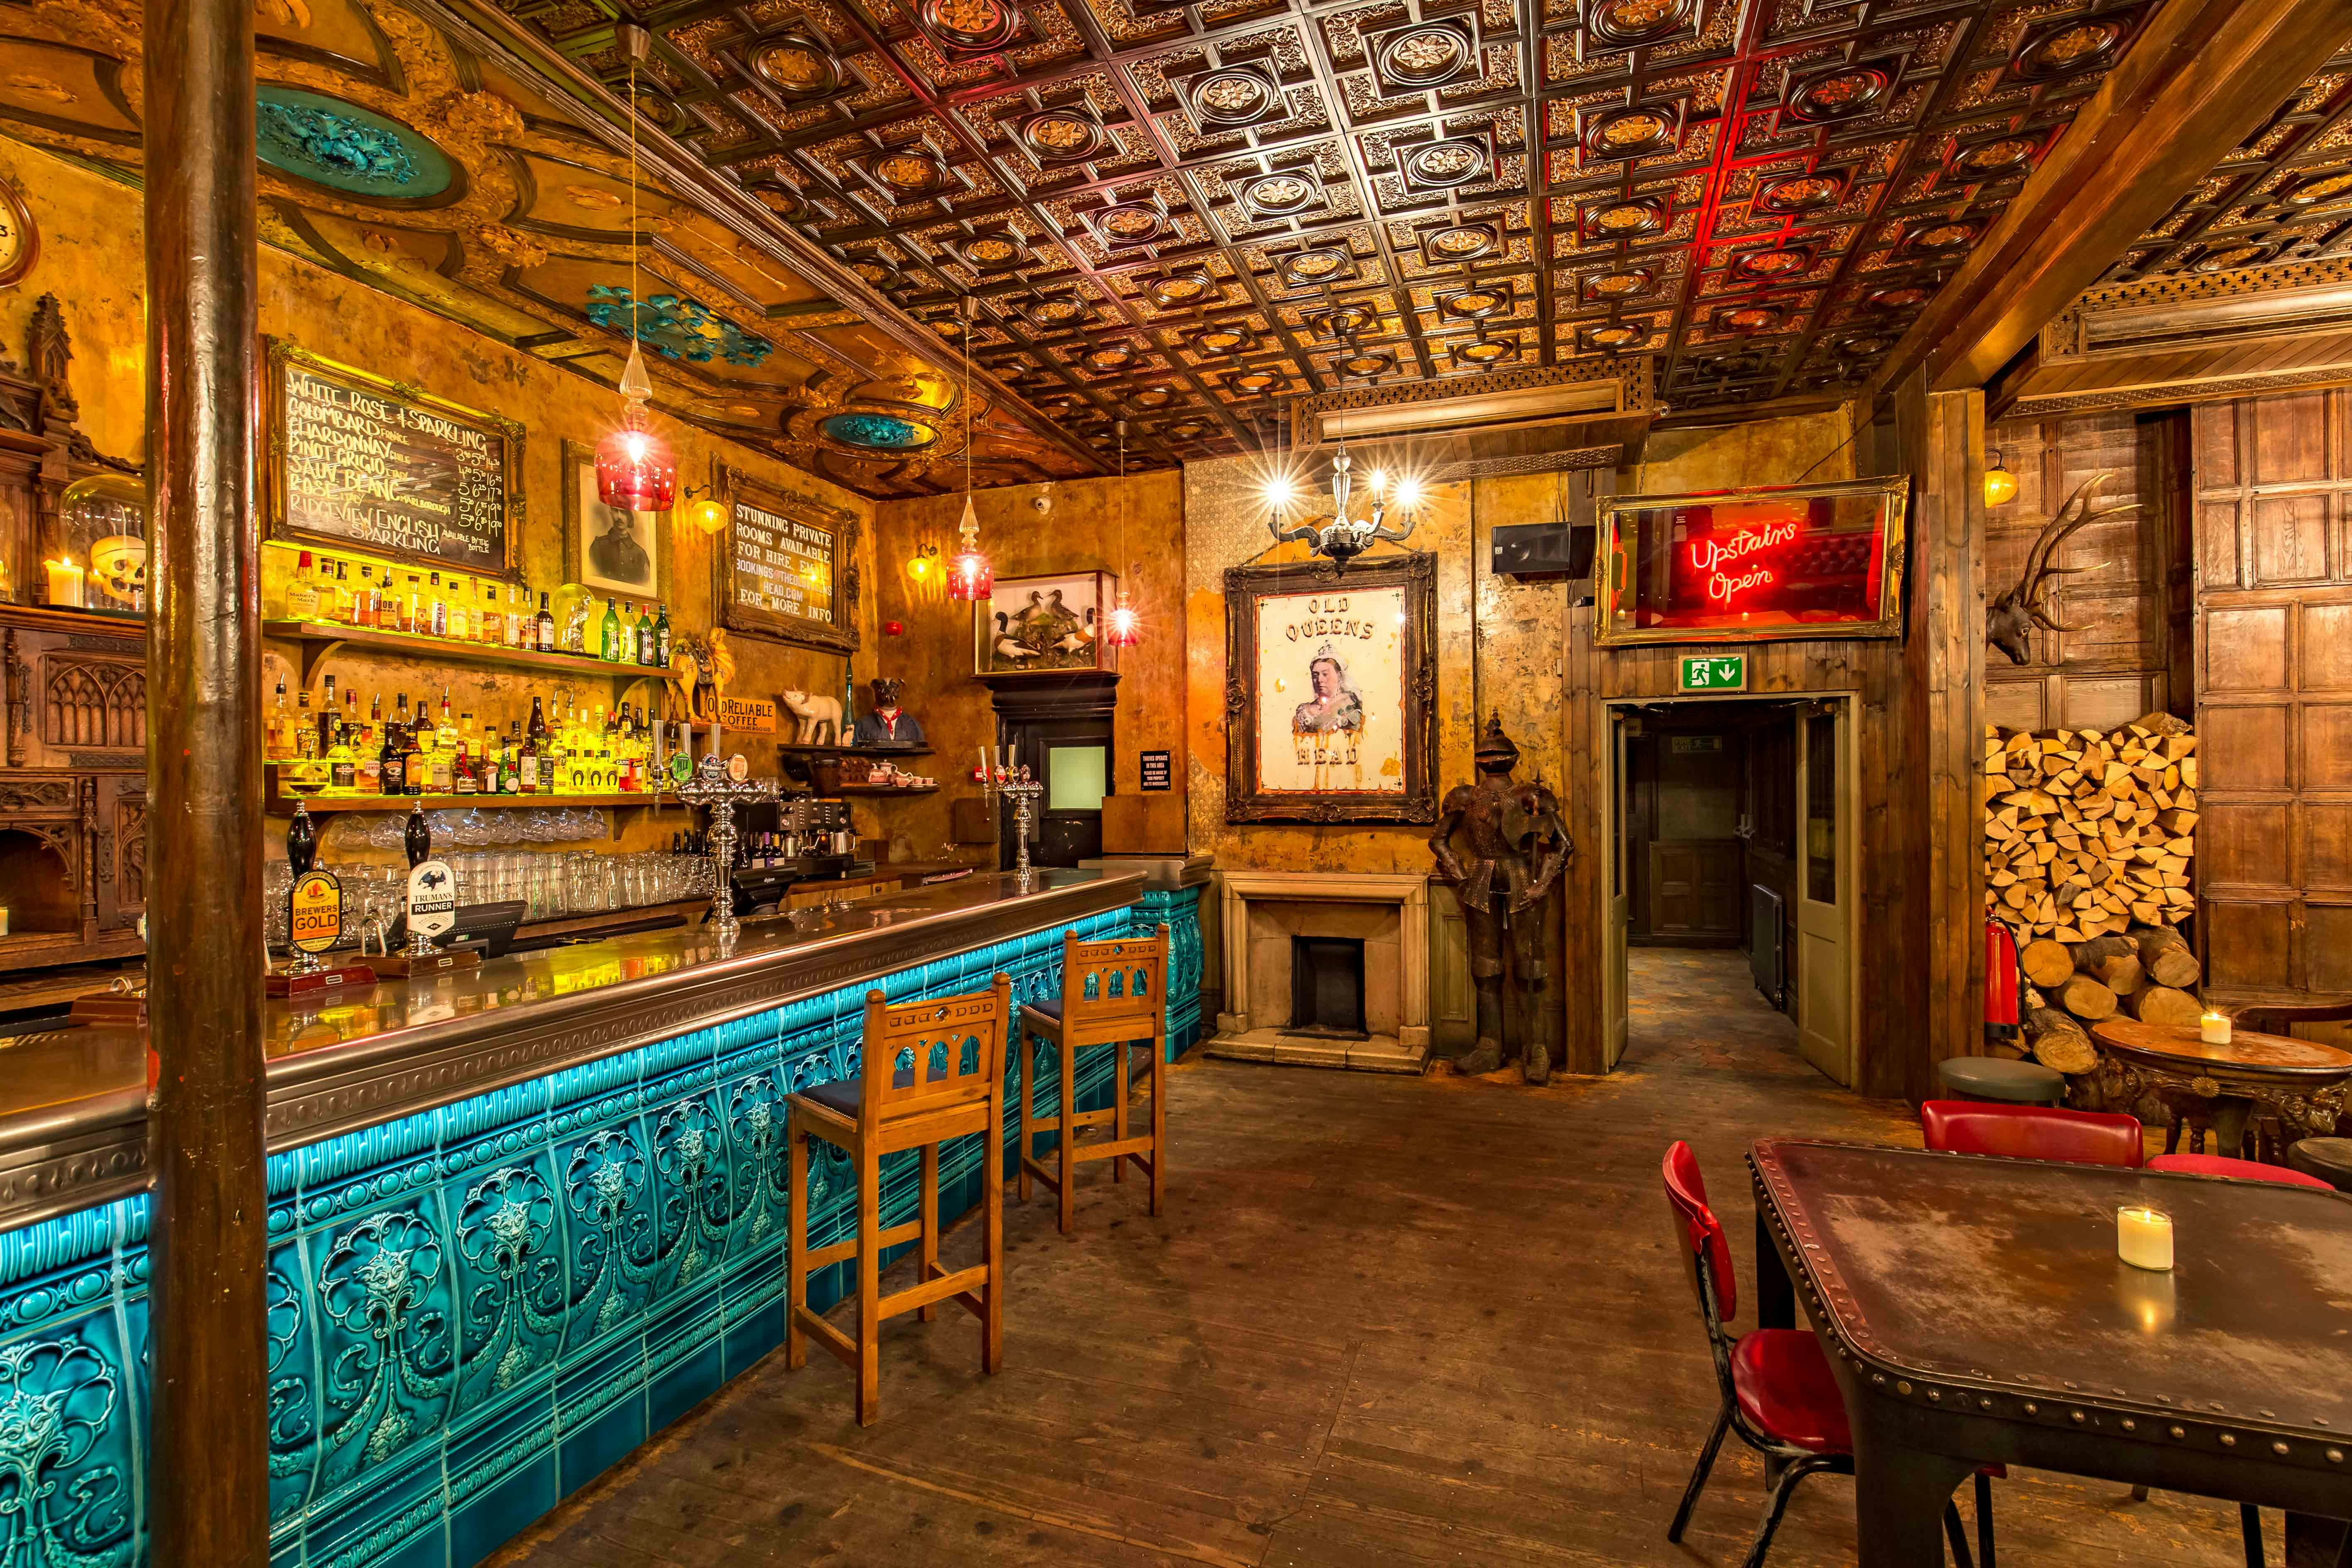 Filming Locations Venues in East London - The Old Queen's Head